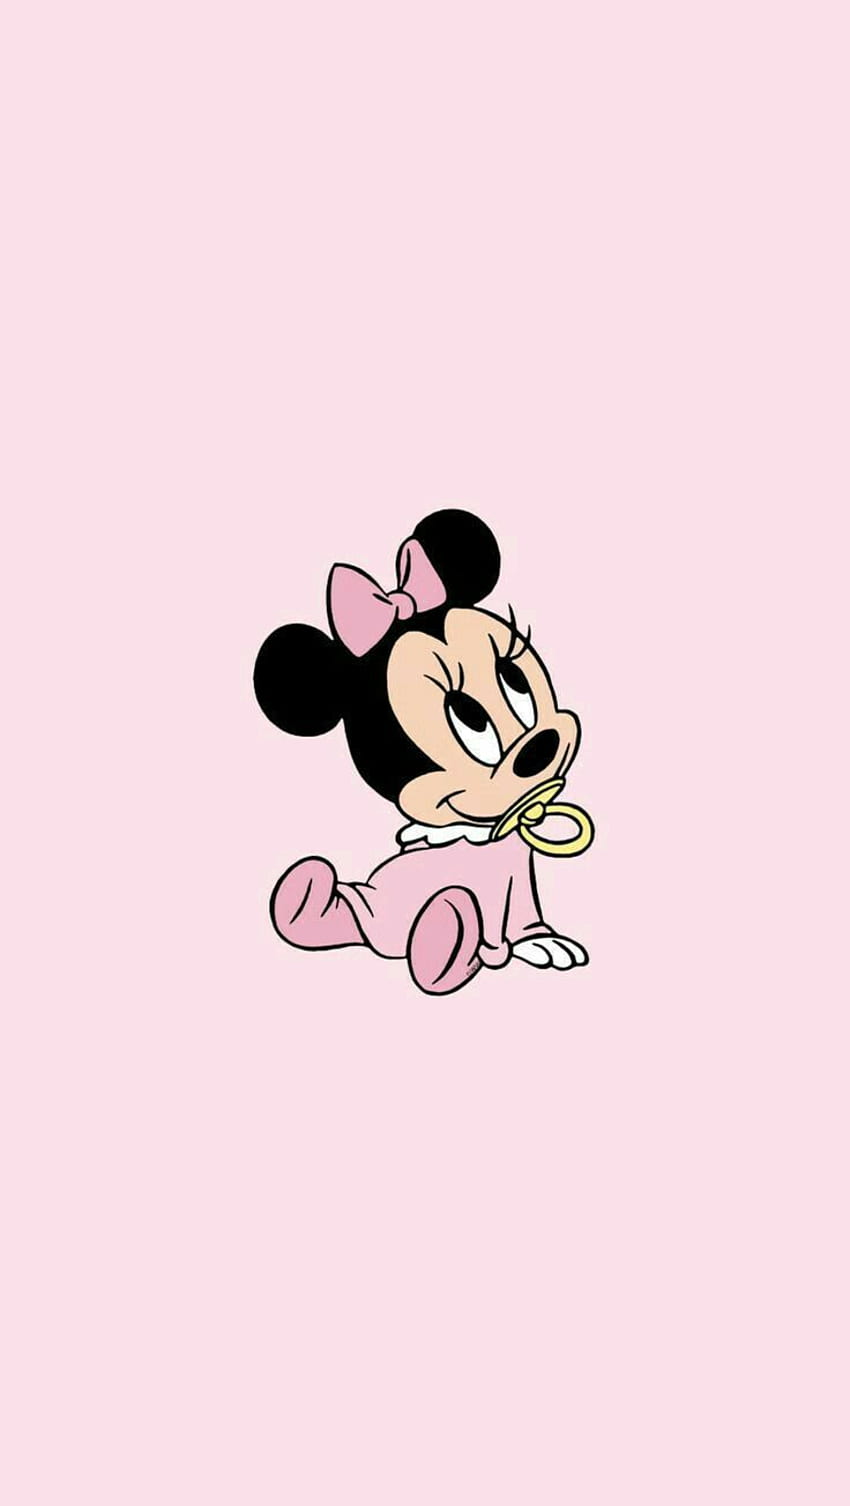 Disney Character Drawing of Mickey Mouse by LaceyPowerPuffGirl on DeviantArt